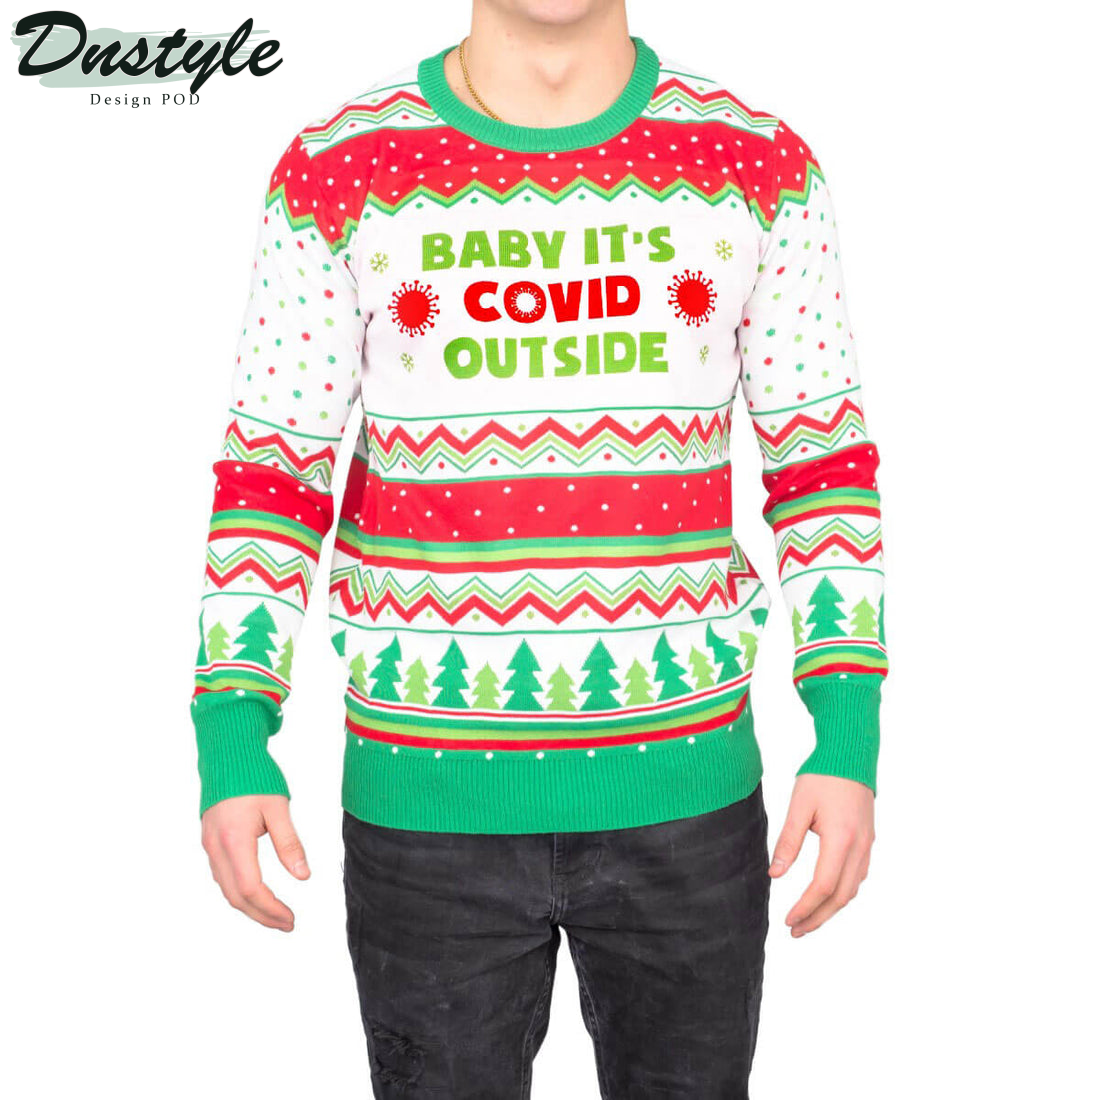 Baby It’s Covid Outside Ugly Sweater